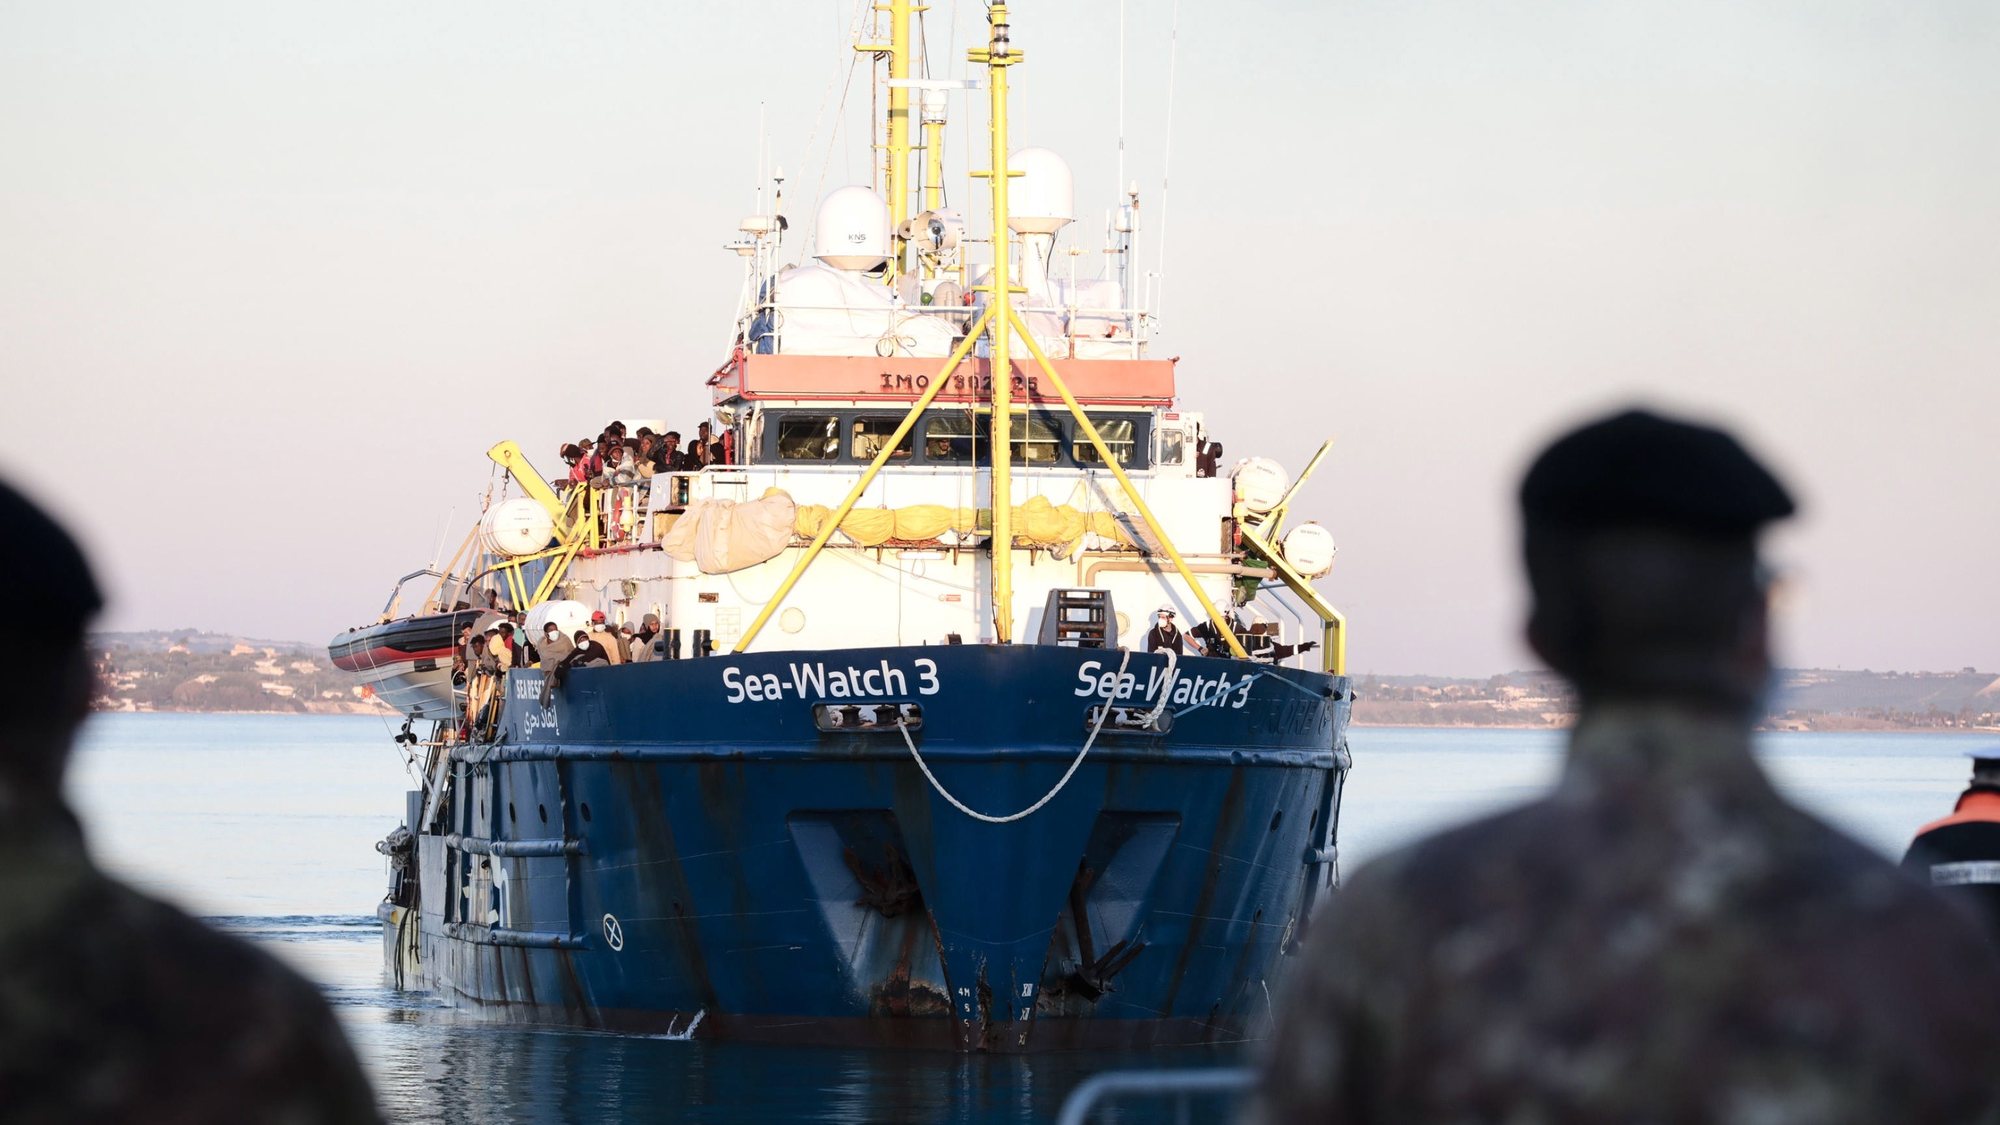 epa09661649 The German NGO migrant rescue ship Sea Watch 3 with 440 migrants on board arrives in the port of Pozzallo, Sicily island, southern Italy, 31 December 2021. The German NGO migrant rescue ship Sea Watch 3 was assigned the port of Pozzallo in Sicily to land its 440 rescued migrants after a week at sea. The ship was at sea since Christmas Eve after carrying out five rescues.  EPA/FRANCESCO RUTA